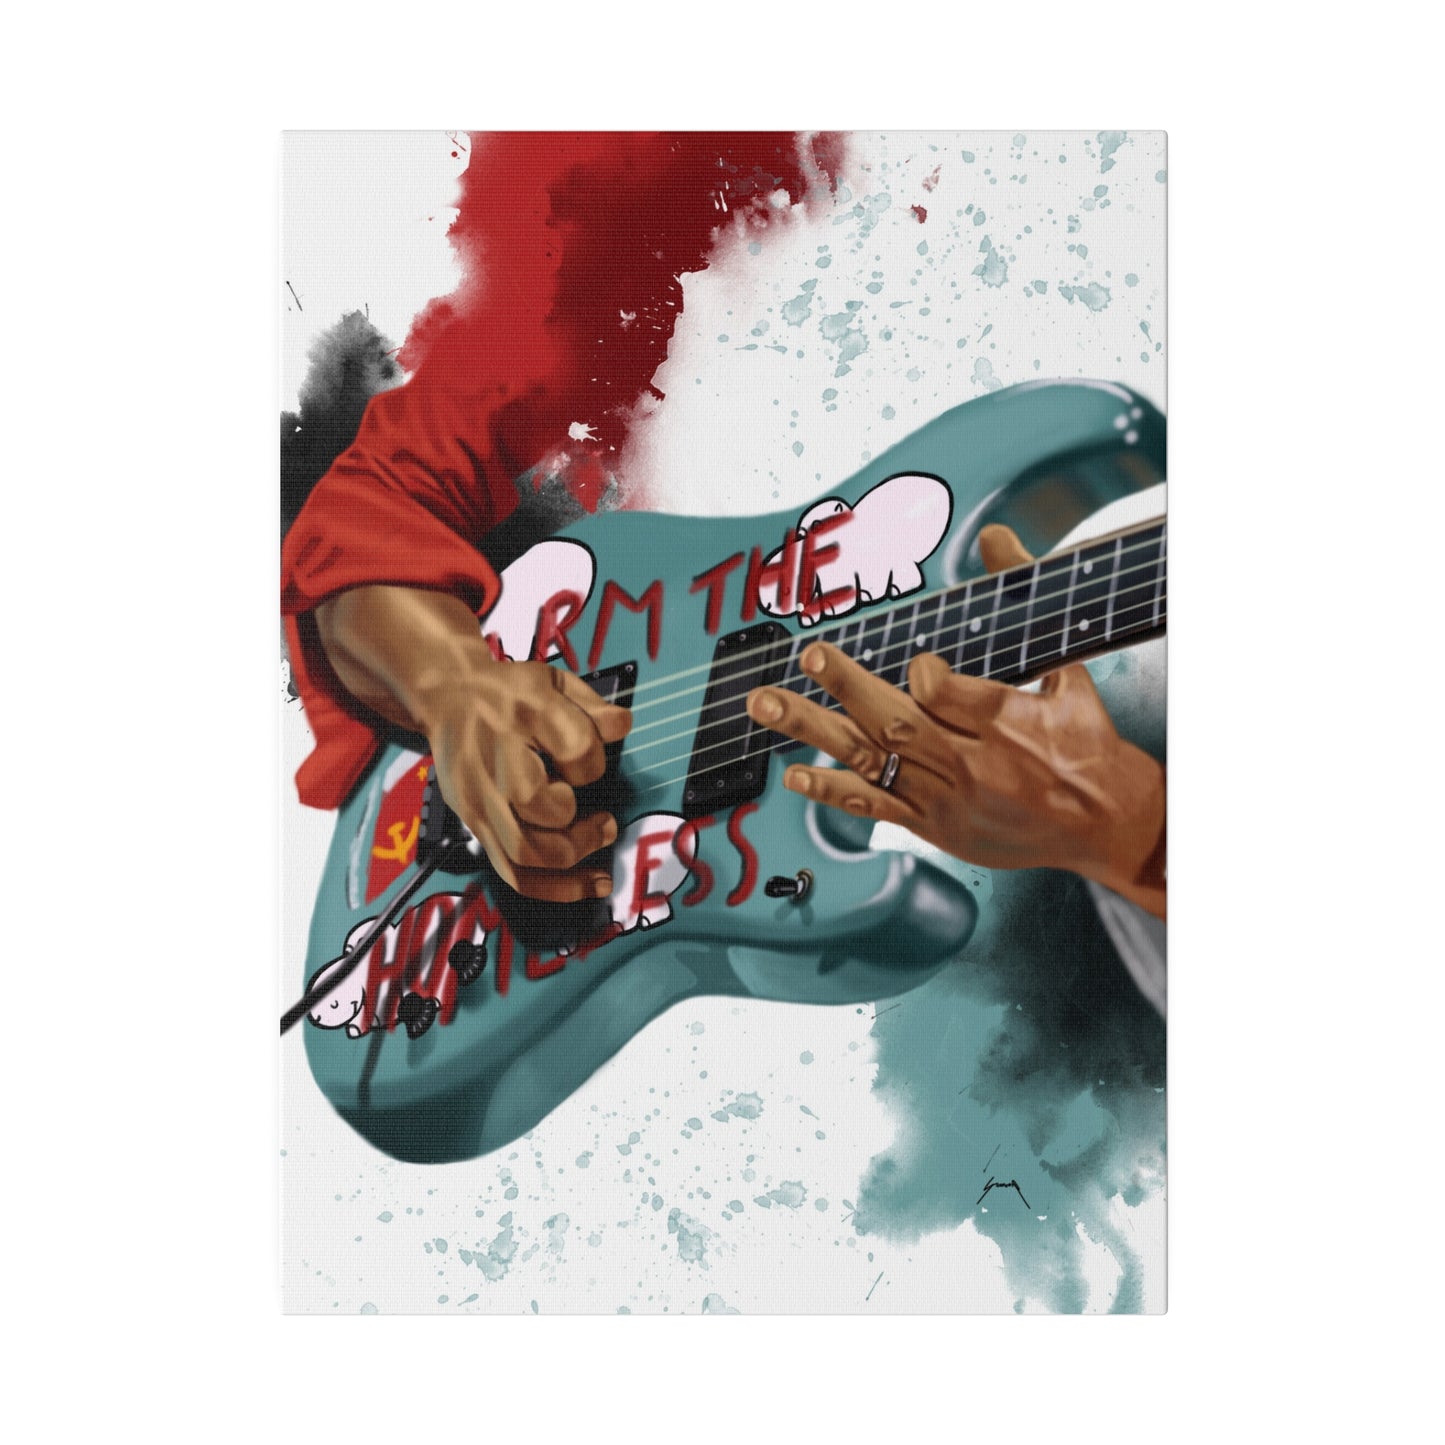 Digital painting of Tom's electric guitar printed on canvas